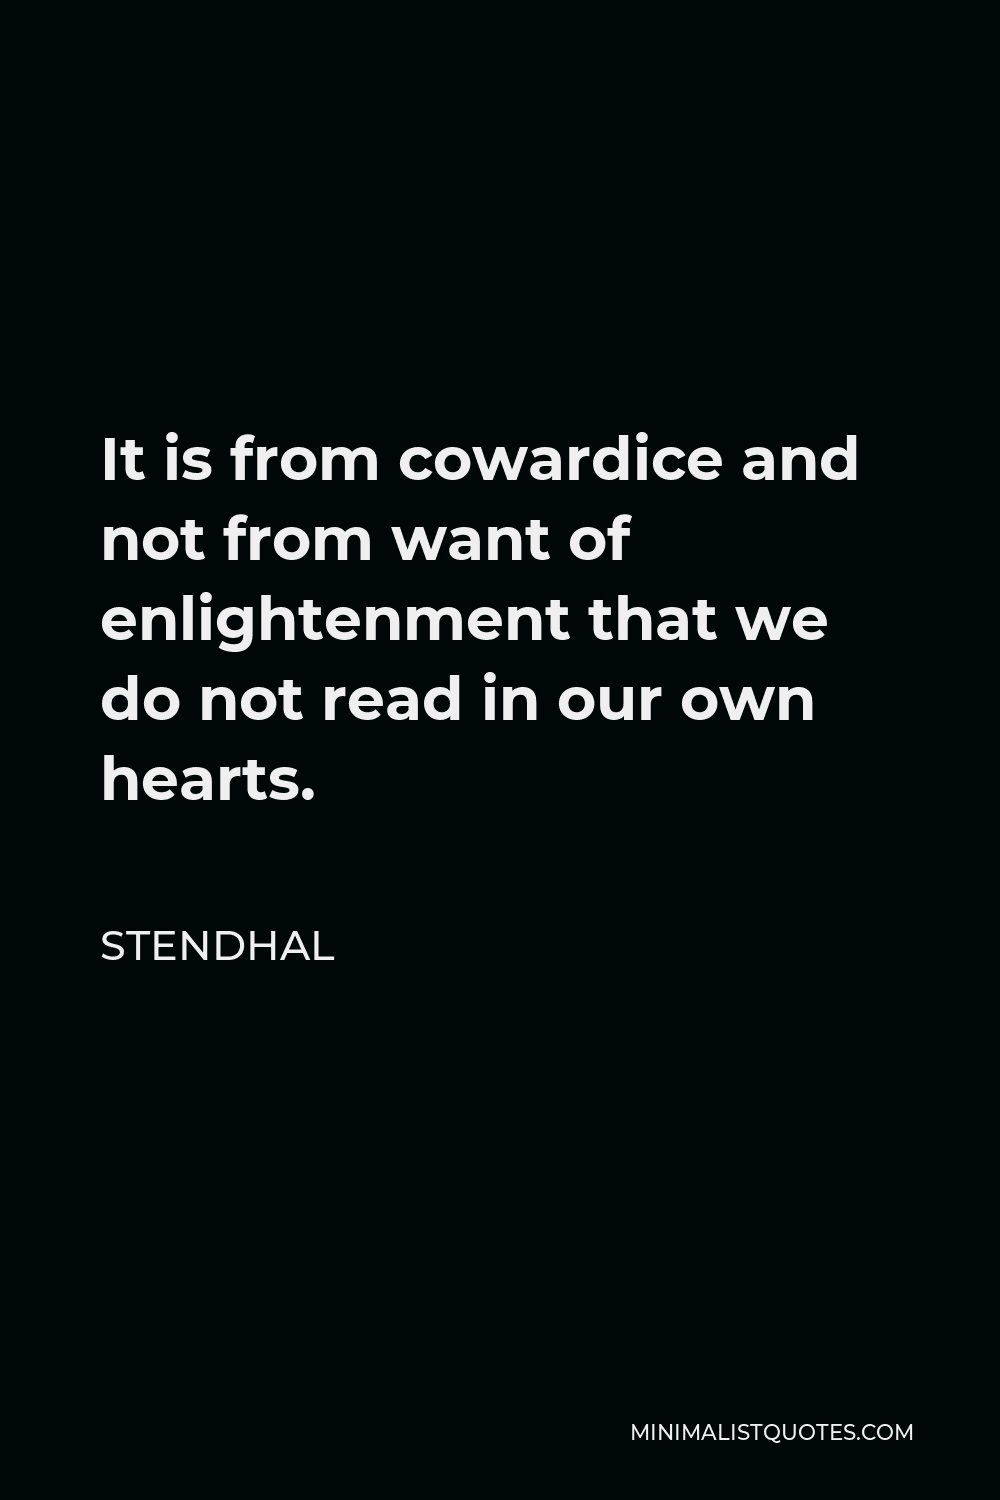 Stendhal Quote - It is from cowardice and not from want of enlightenment that we do not read in our own hearts.